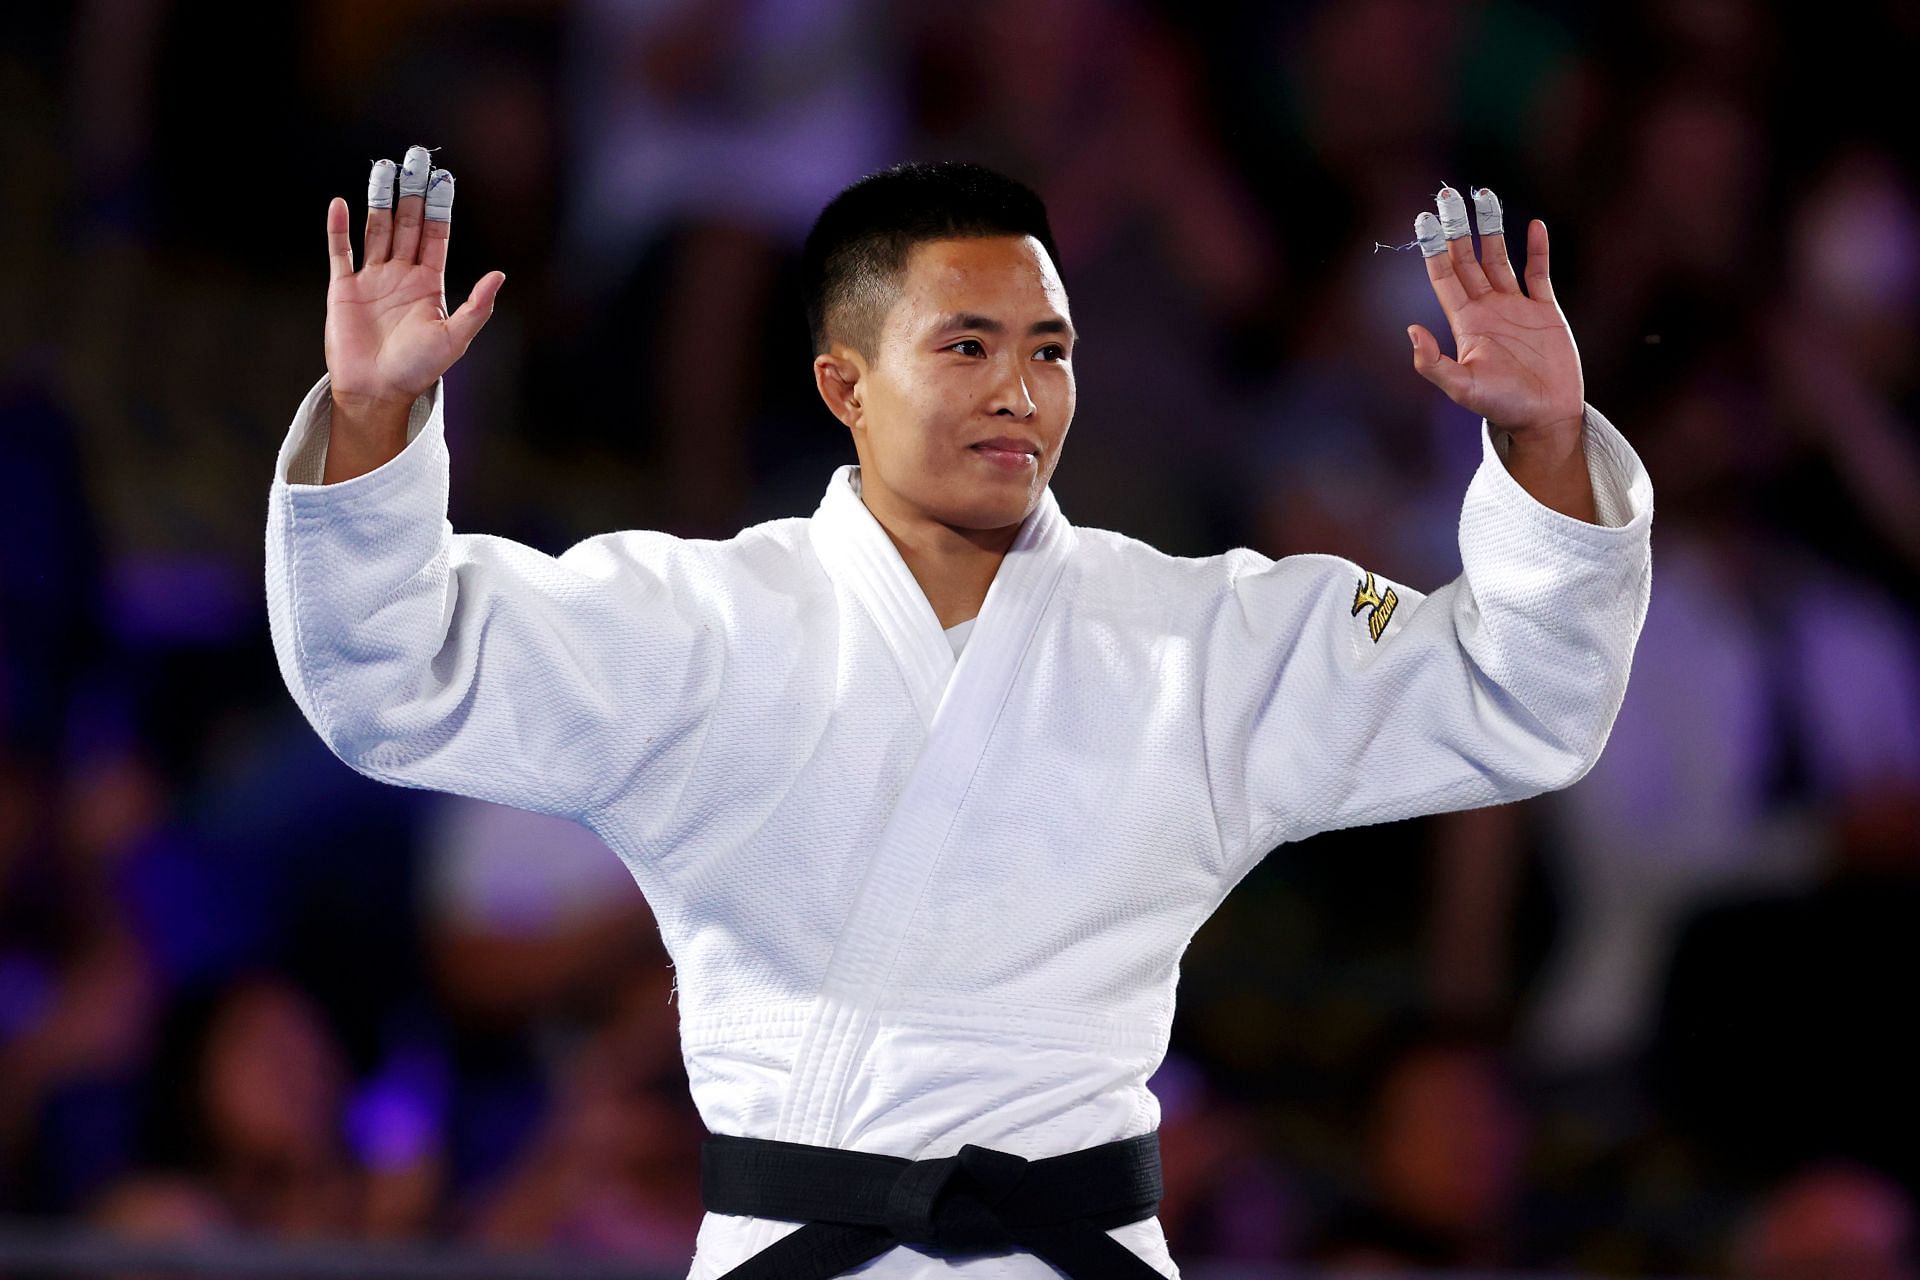 Judo - Commonwealth Games: Day 4